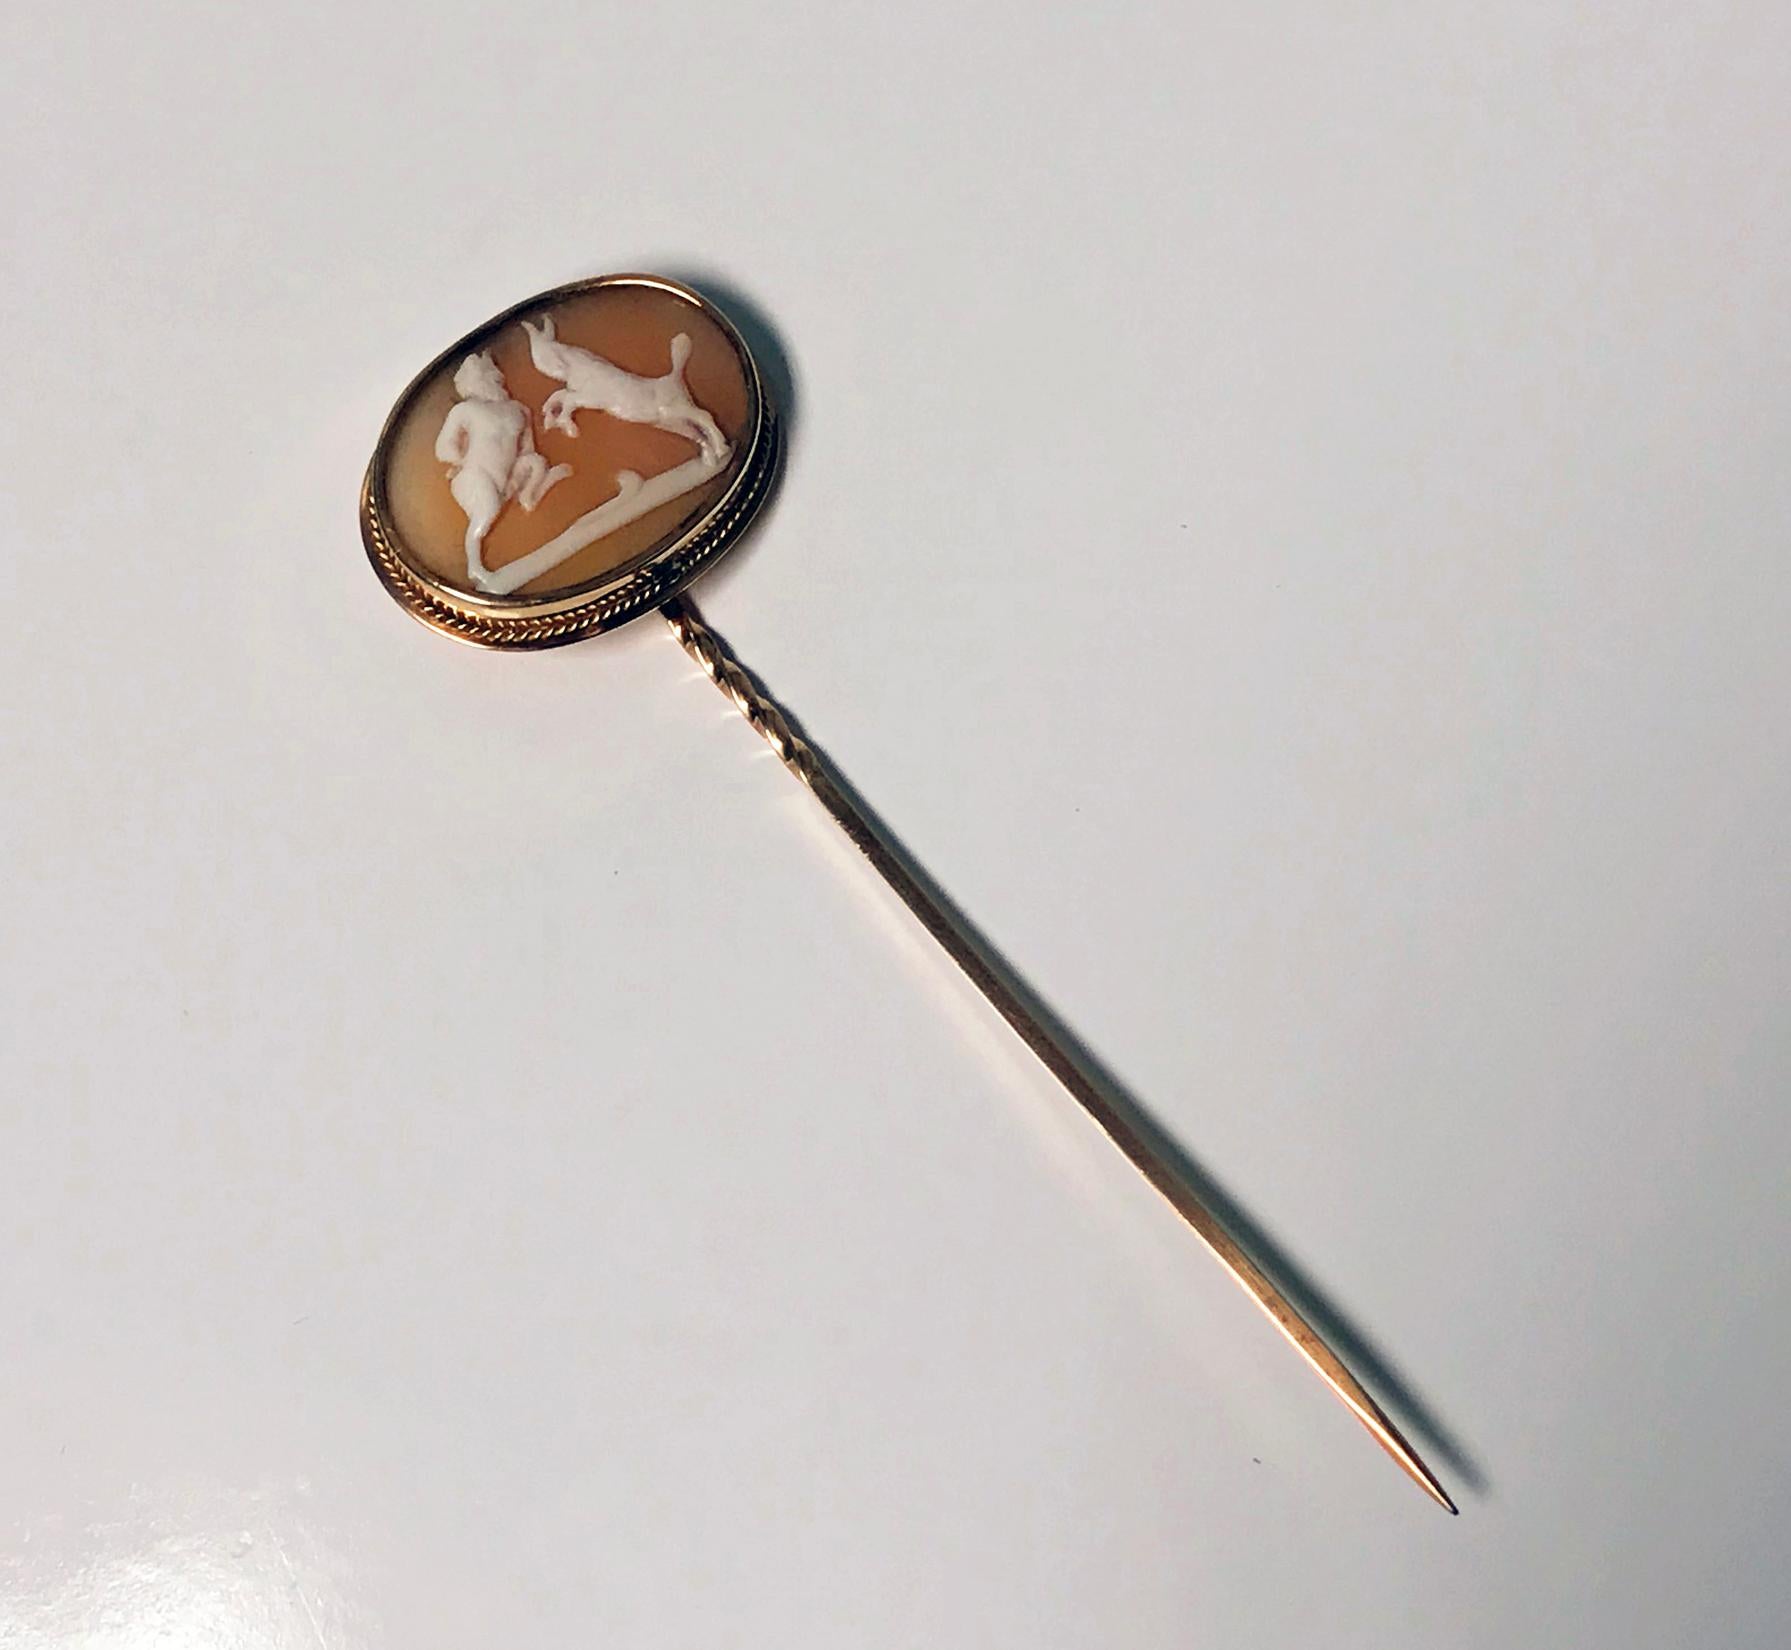 Fine Antique Cameo Stickpin mounted in 15K (acid tested) rose Gold, C.1875. The shell cameo well carved depicting a Satyr sparring with a Goat, oval shape the surround gold bezel with fine rope border. Length: 3.5 inches. Cameo itself measures: